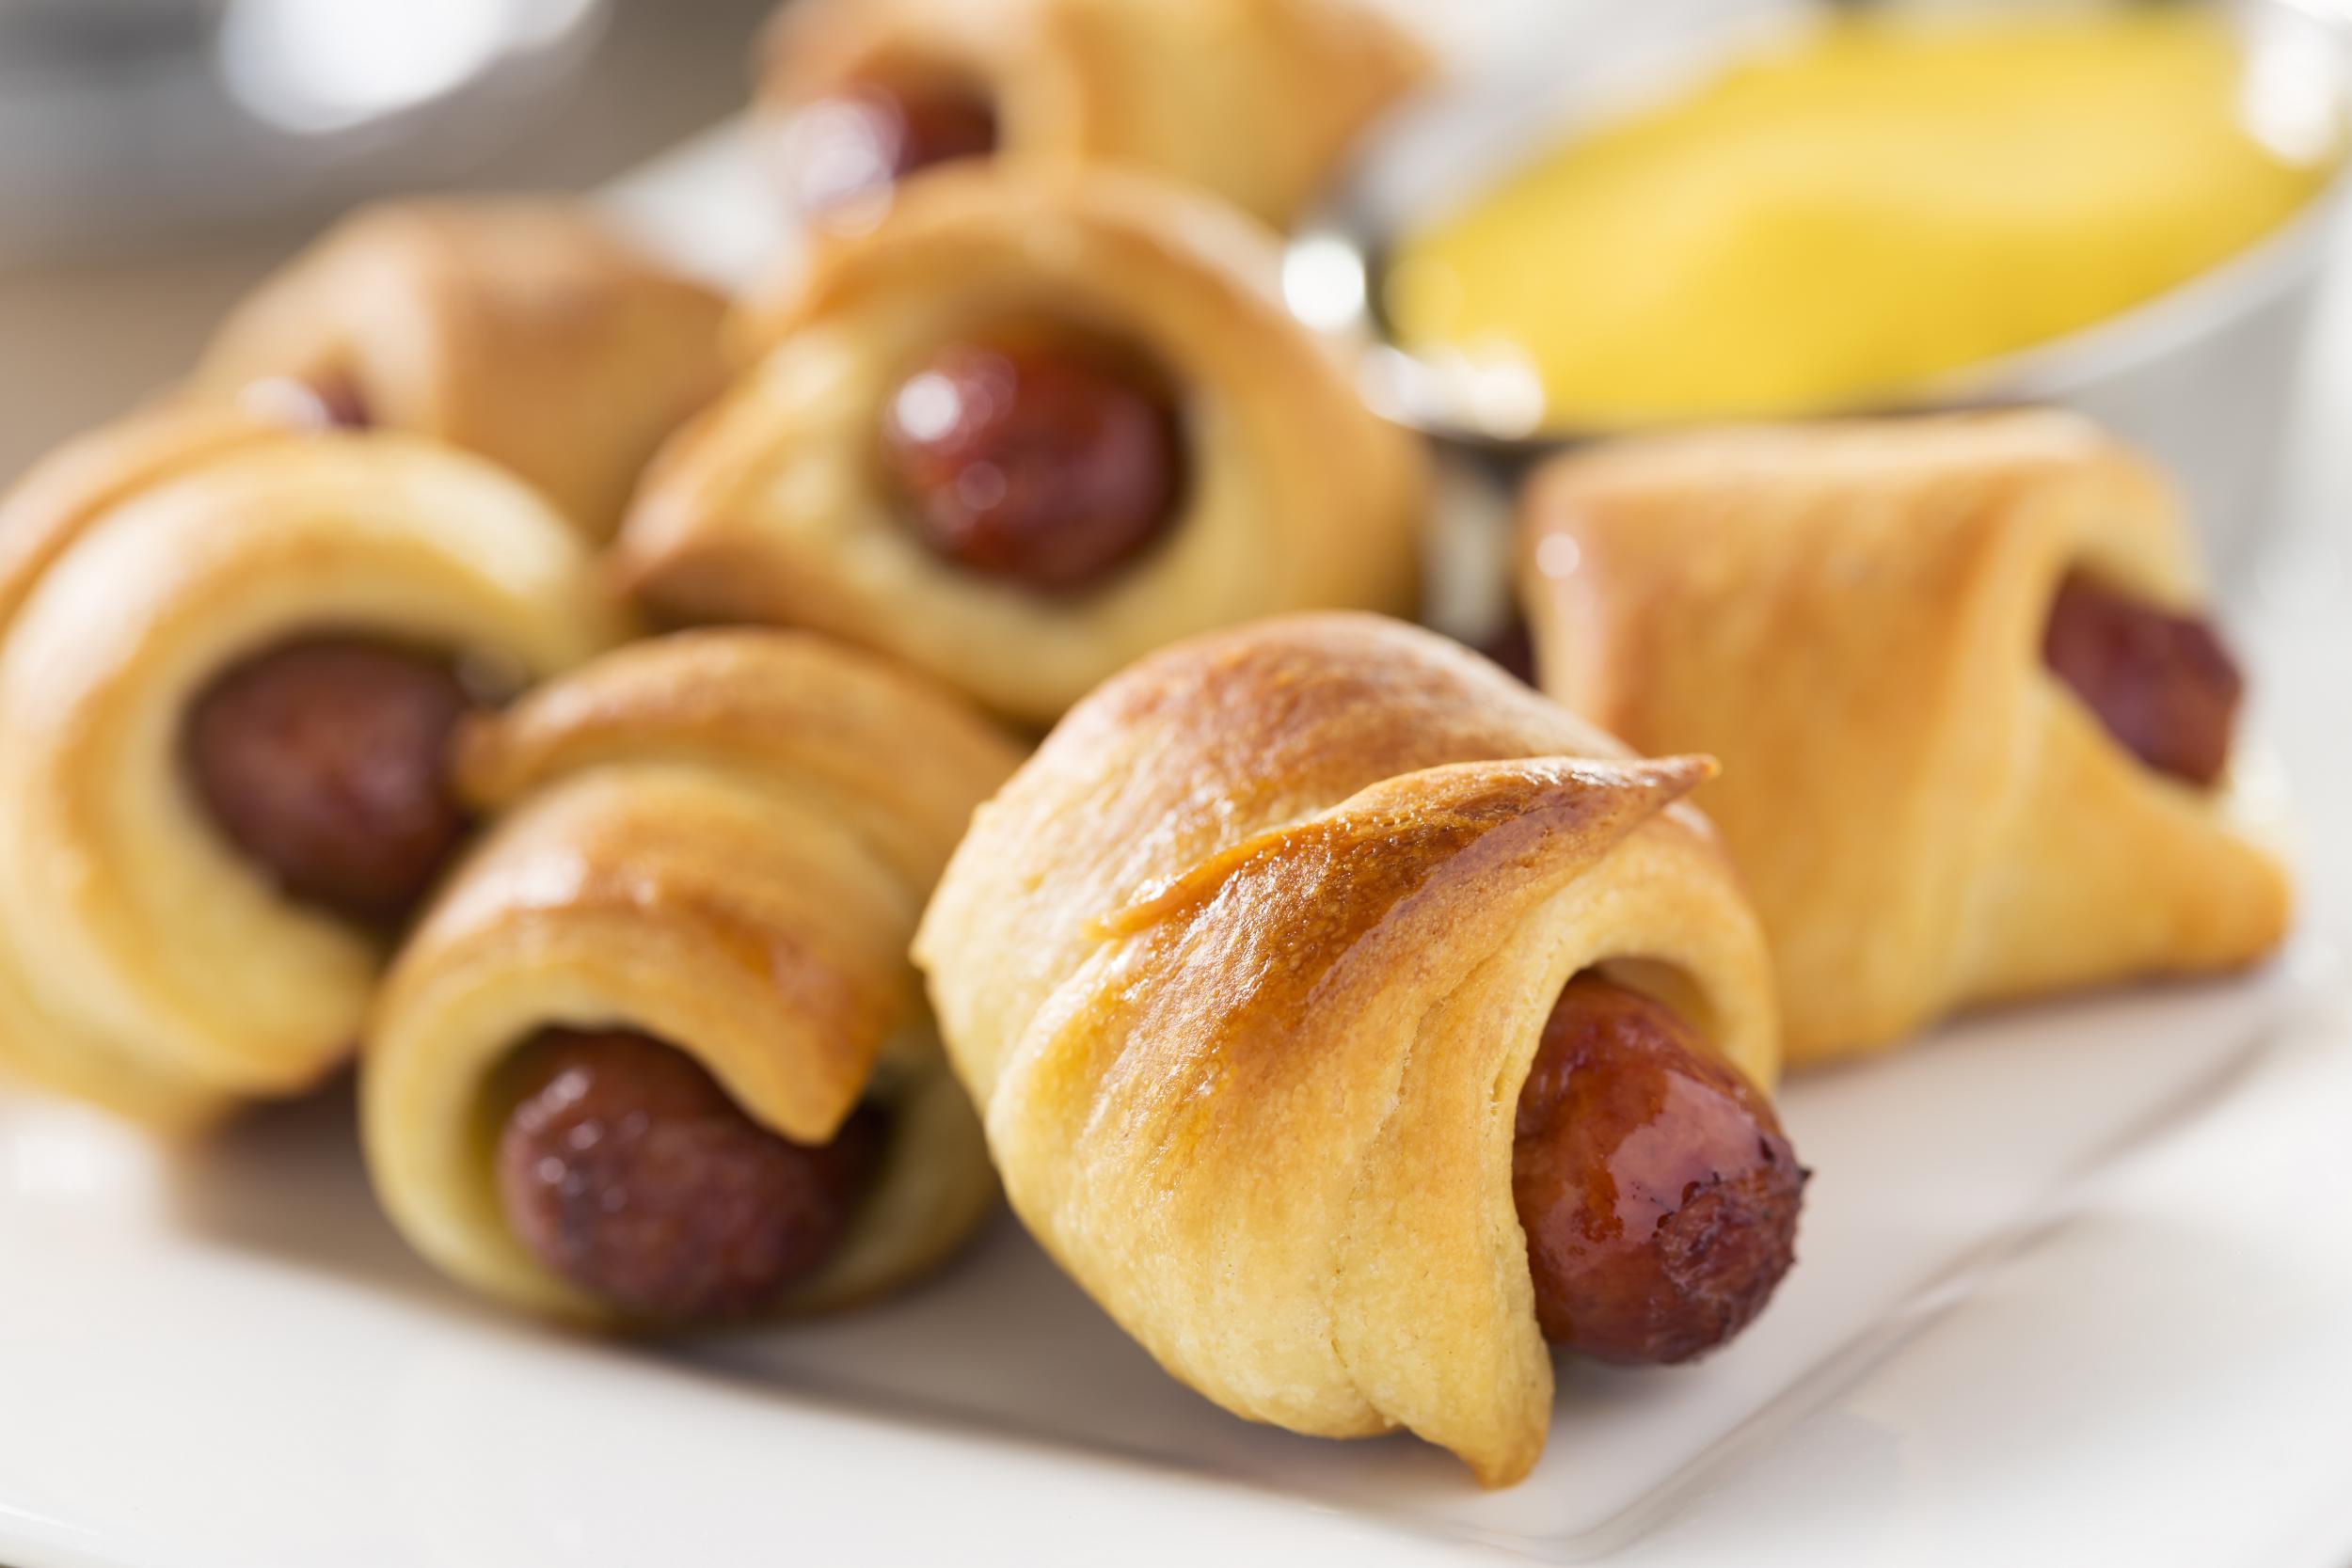 Pigs in a blanket are the perfect party snack